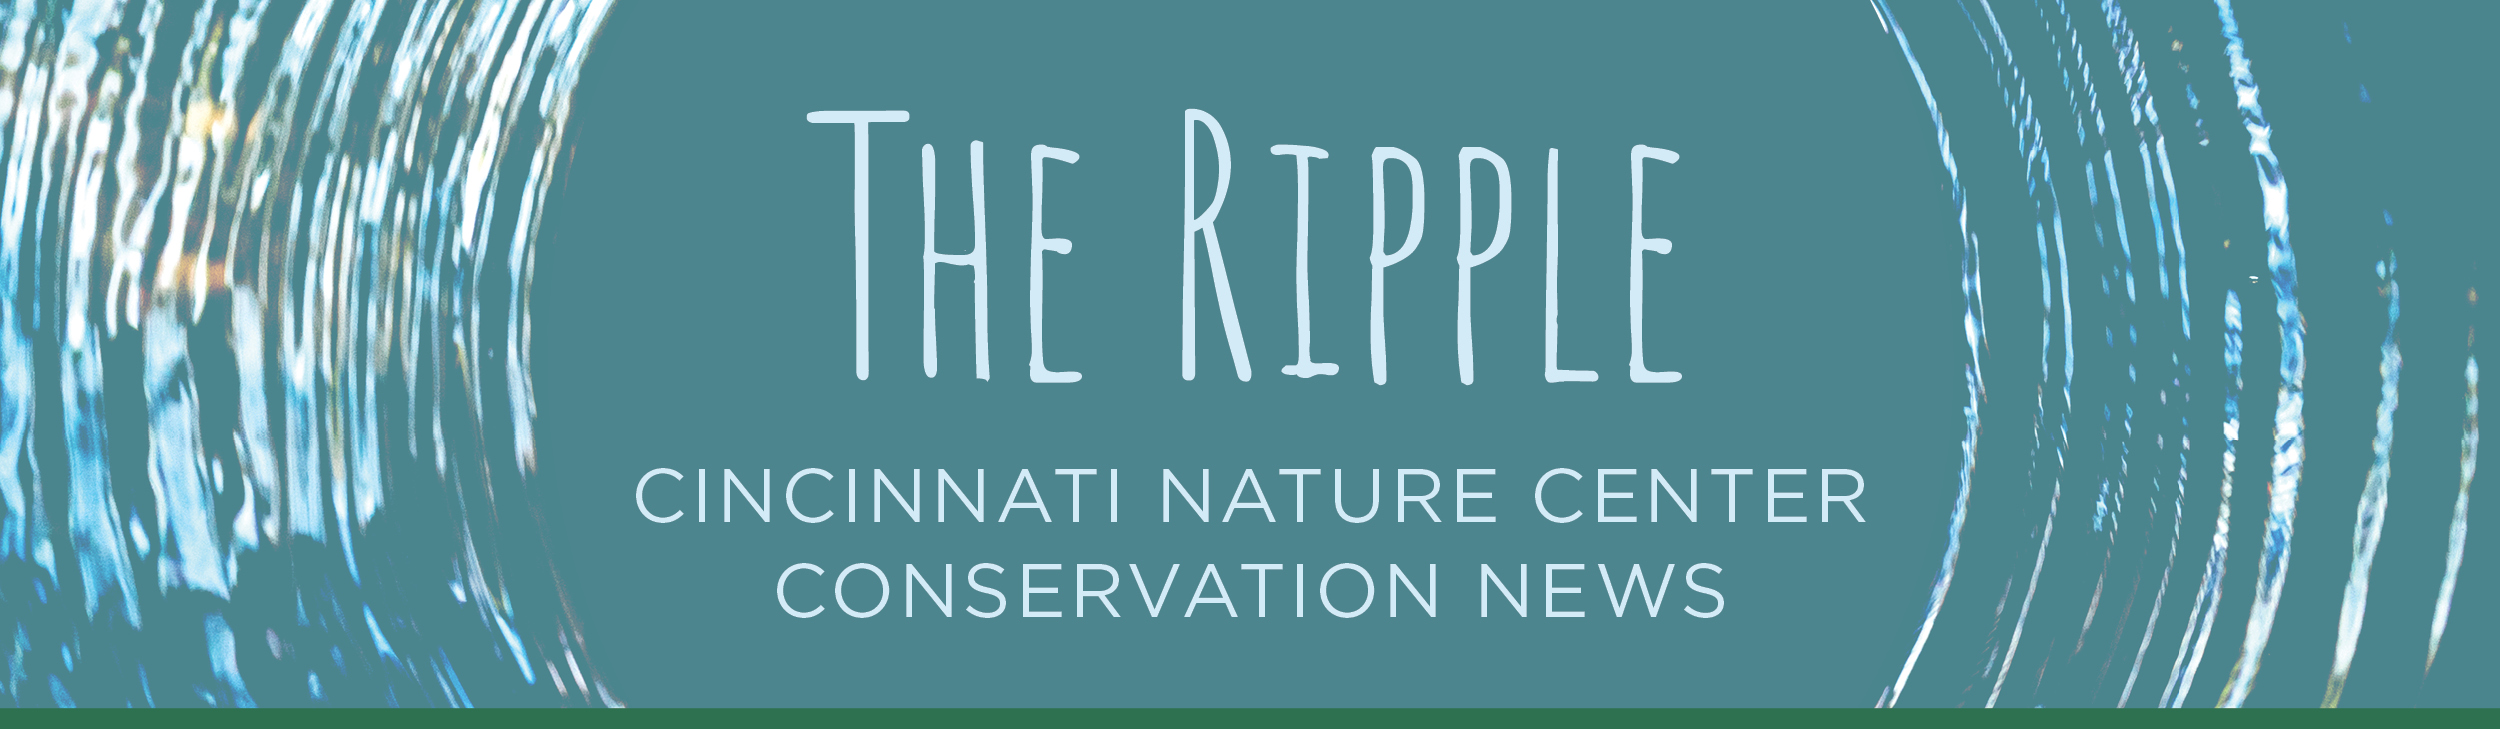  Ripples on water on top of a blue background. The text says THE RIPPLE Cincinnati Nature Center Conservation News